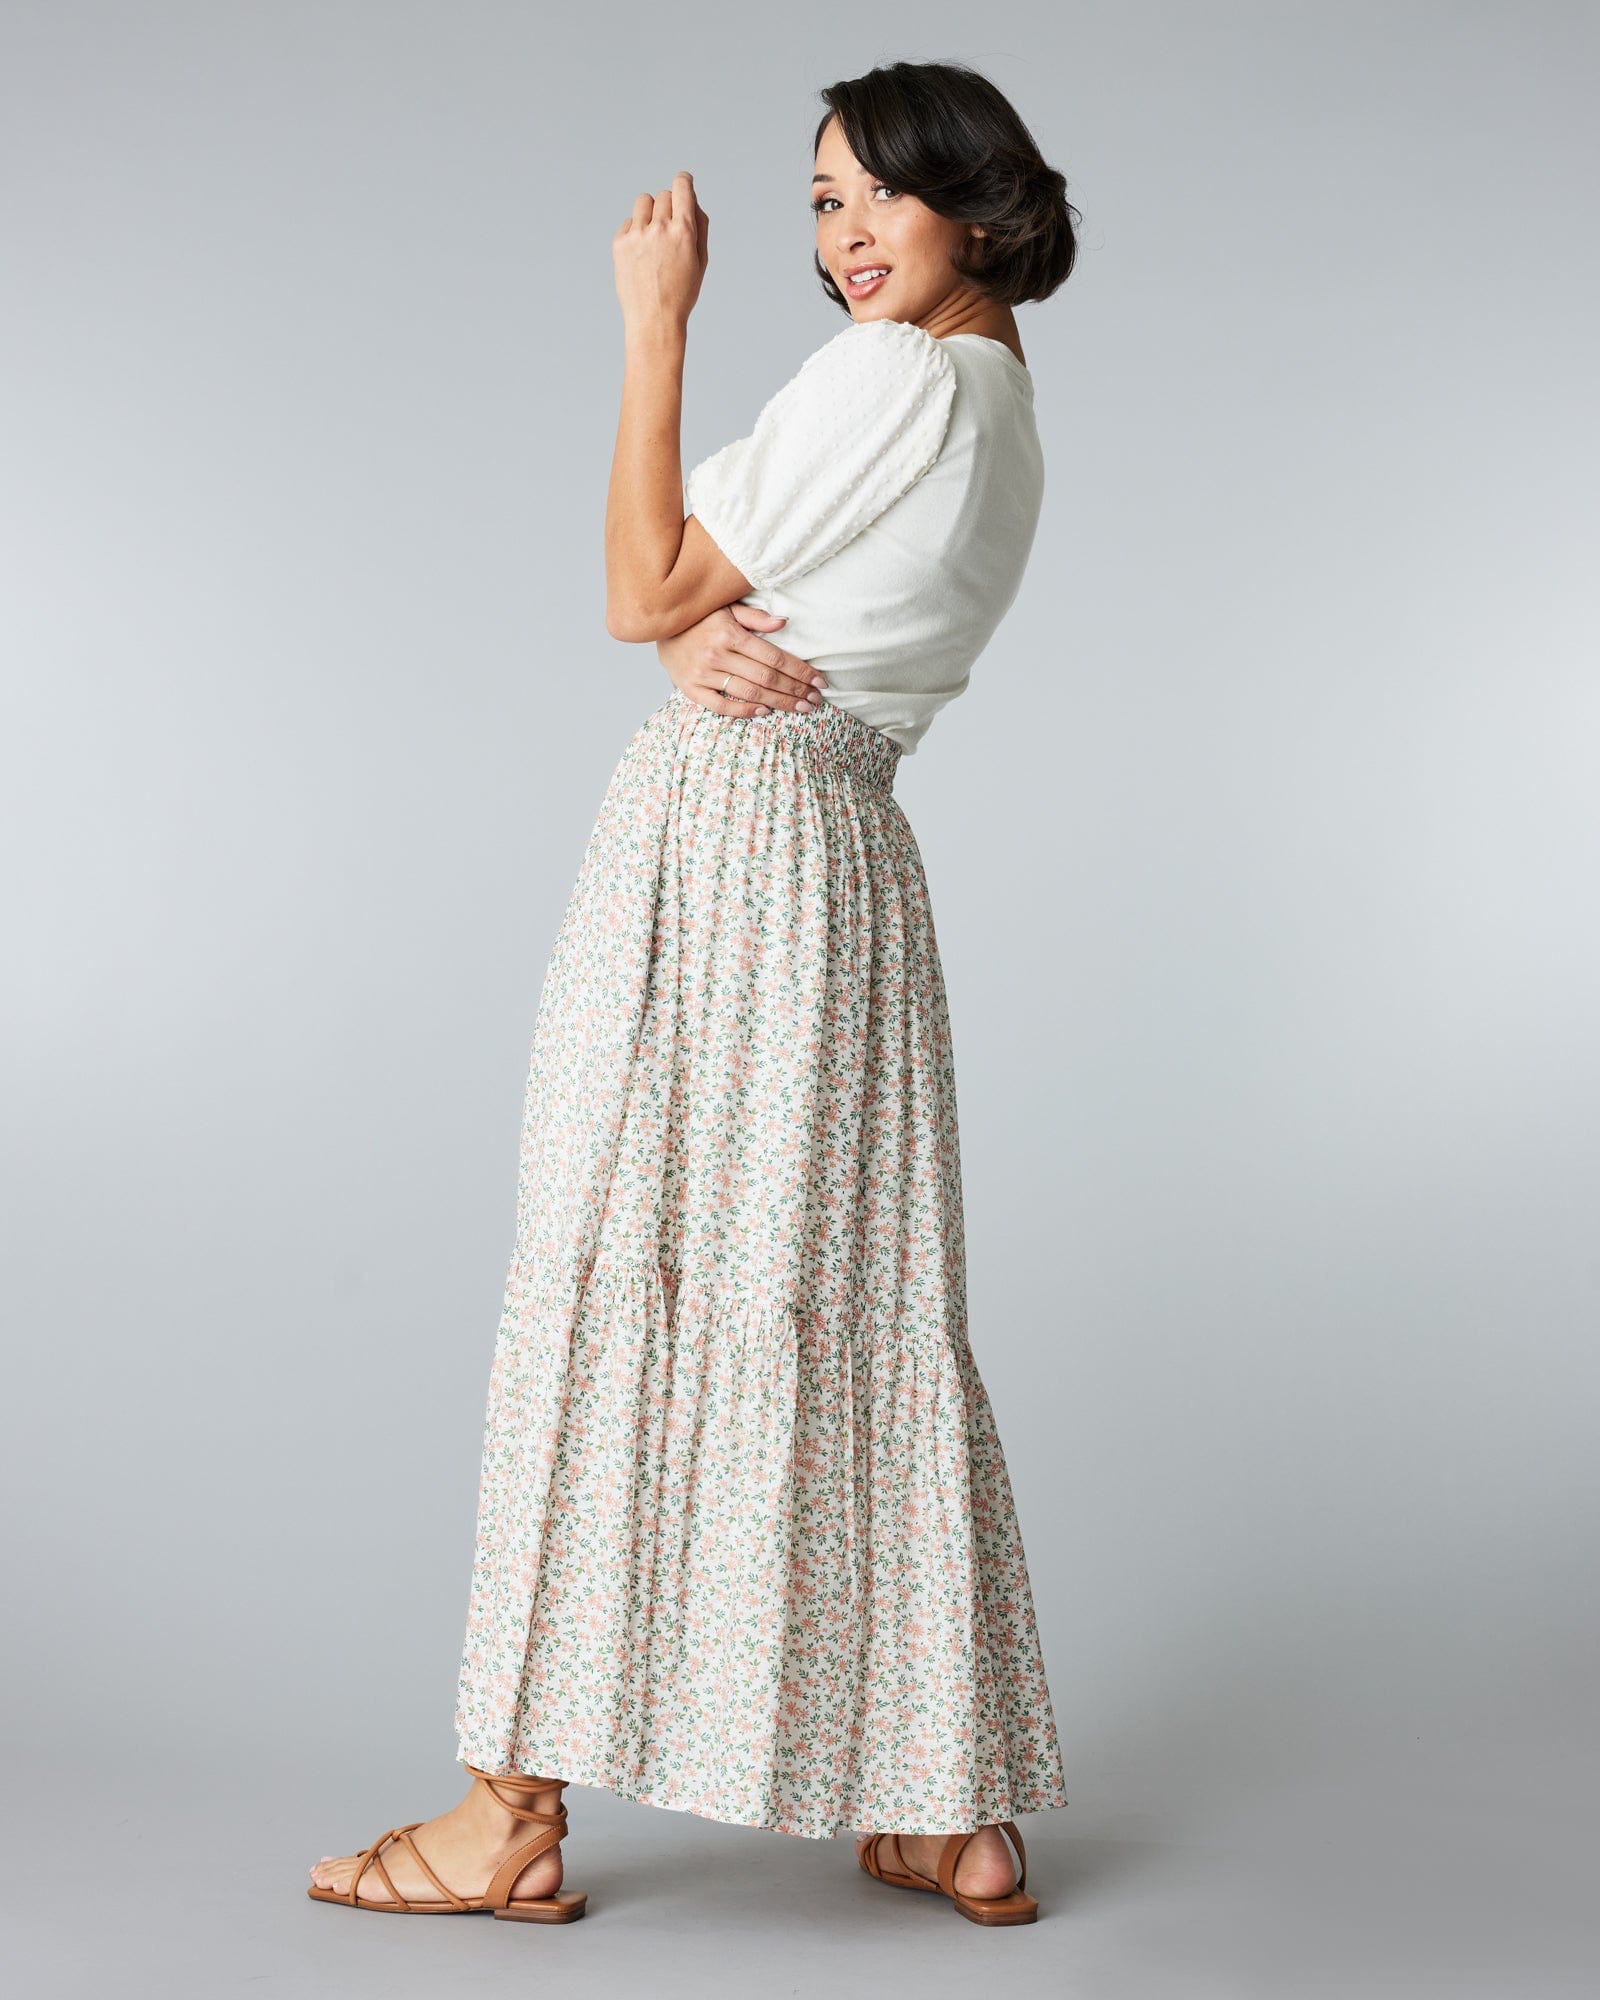 Woman in a maxi length, floral printed skirt